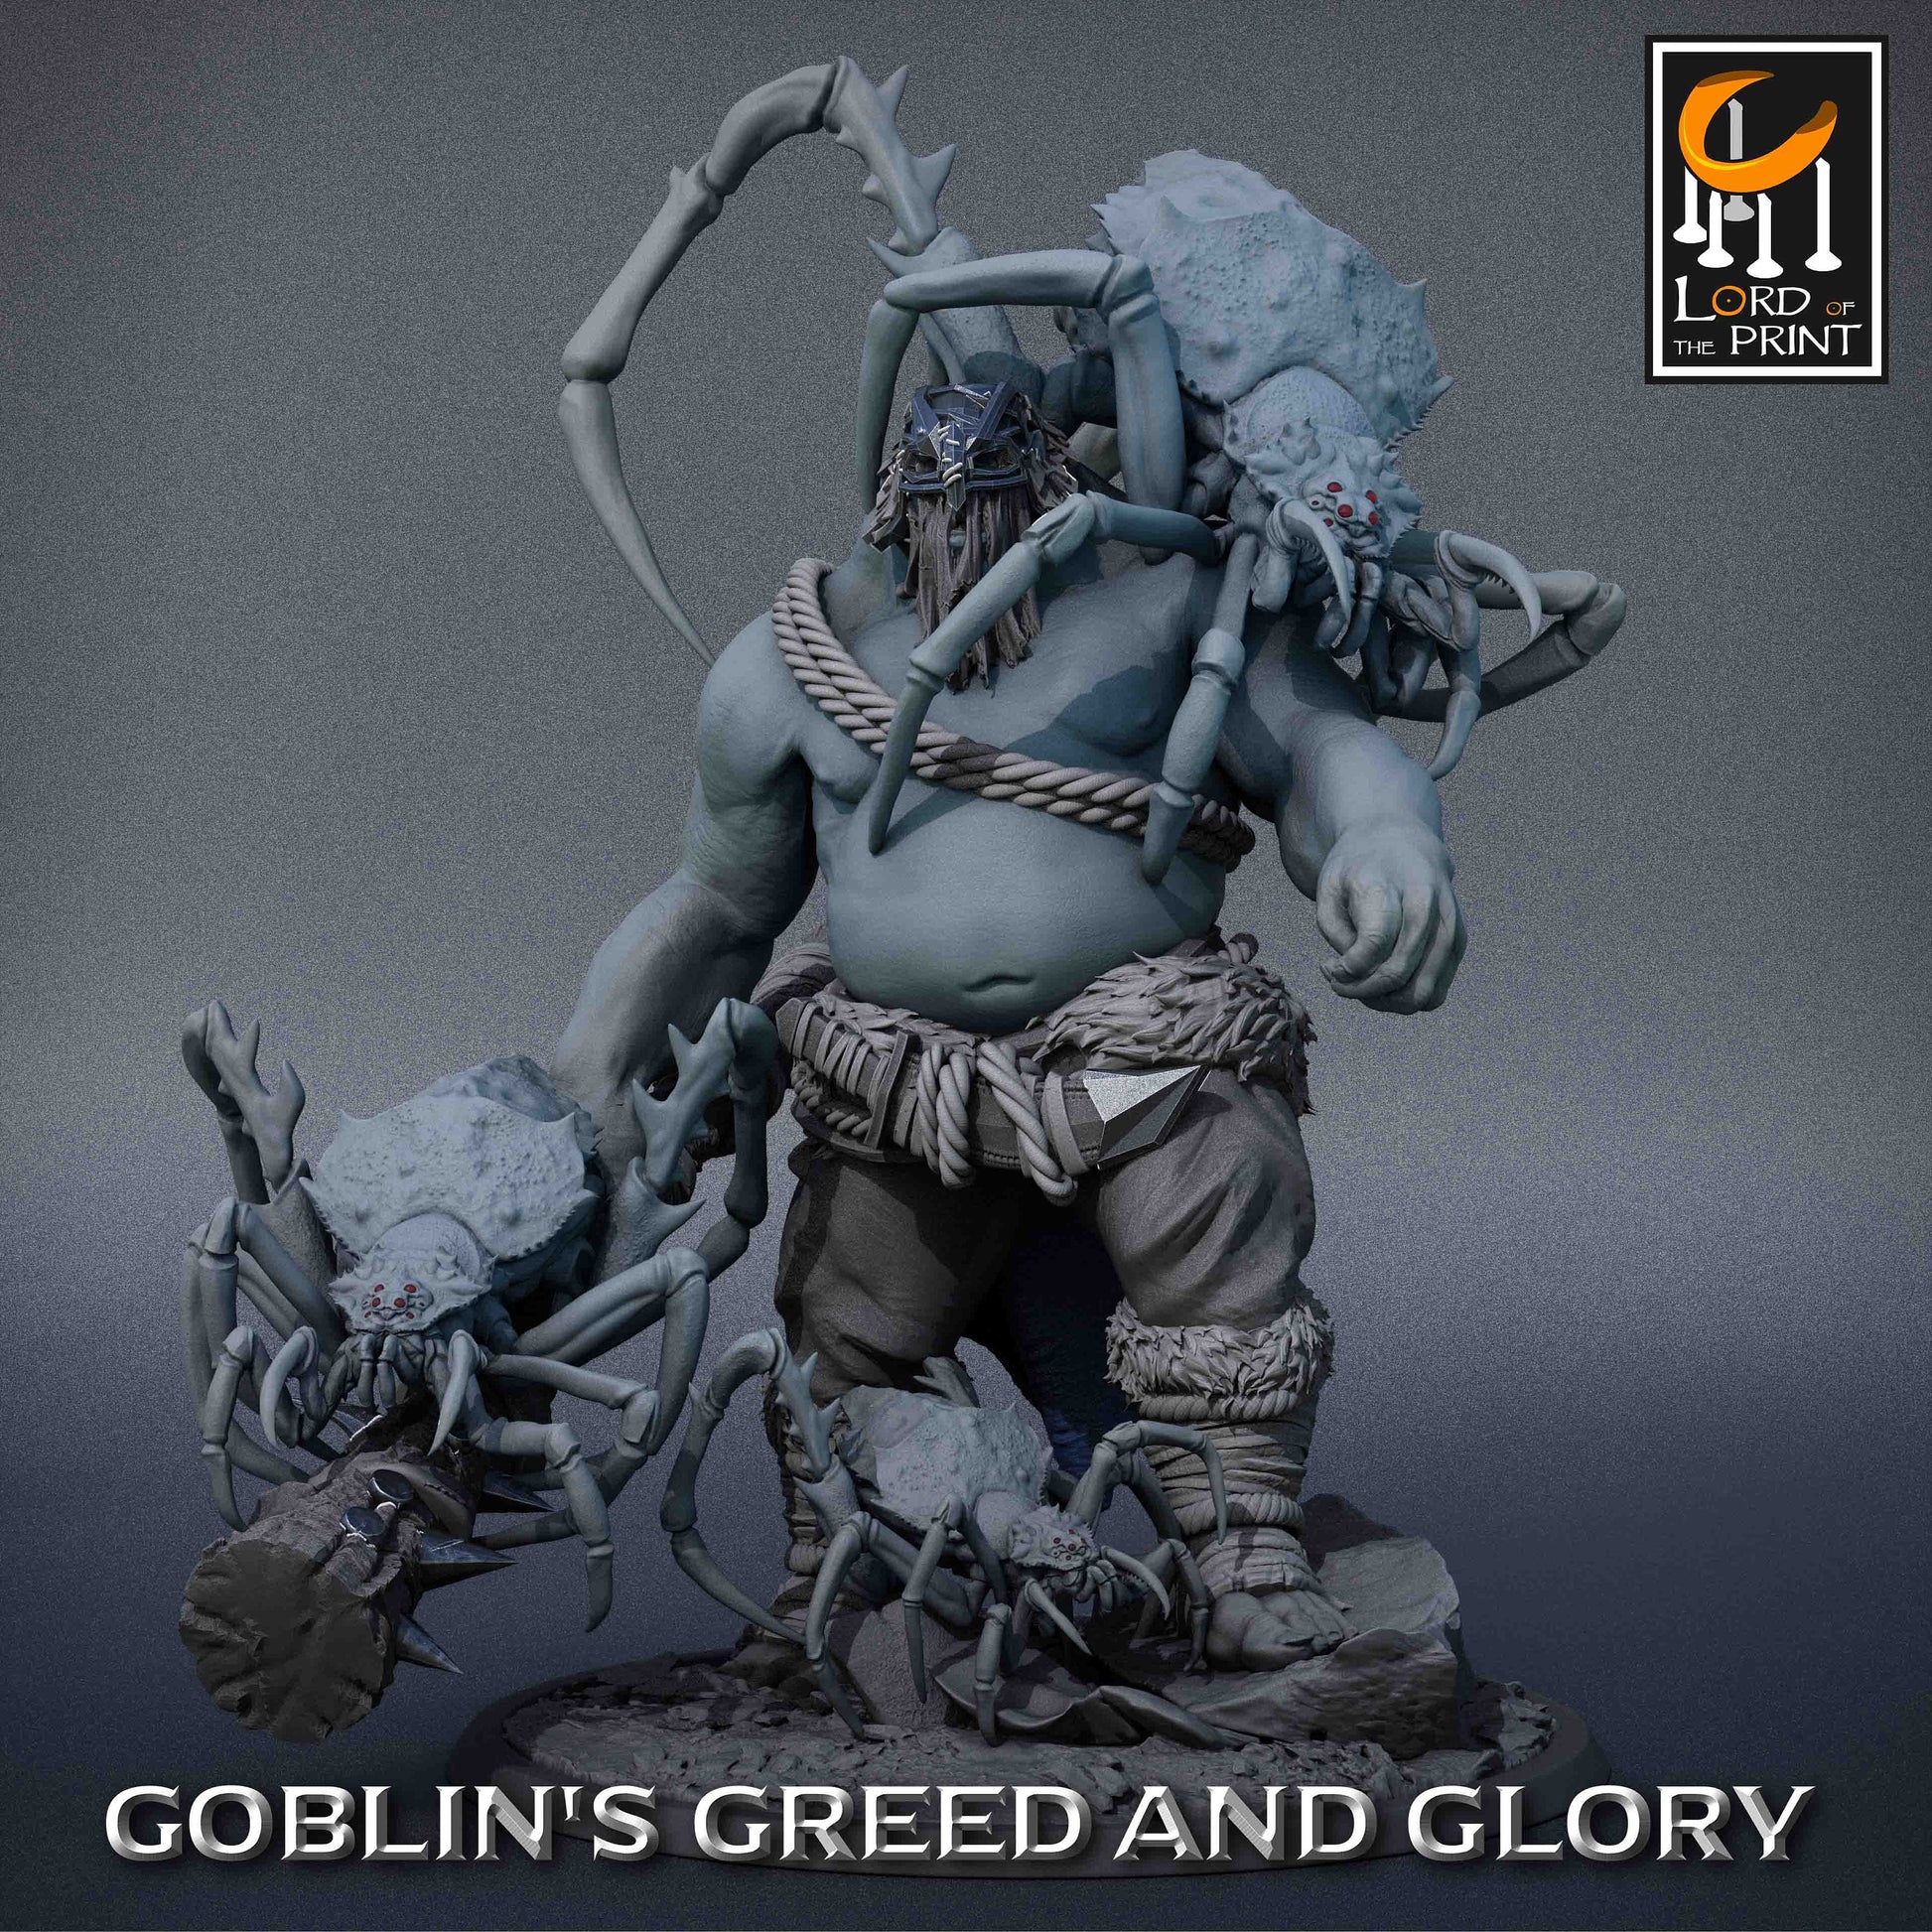 Ogres | RPG Miniature for Dungeons and Dragons|Pathfinder|Tabletop Wargaming | Ogre Miniature | Lord of the Print